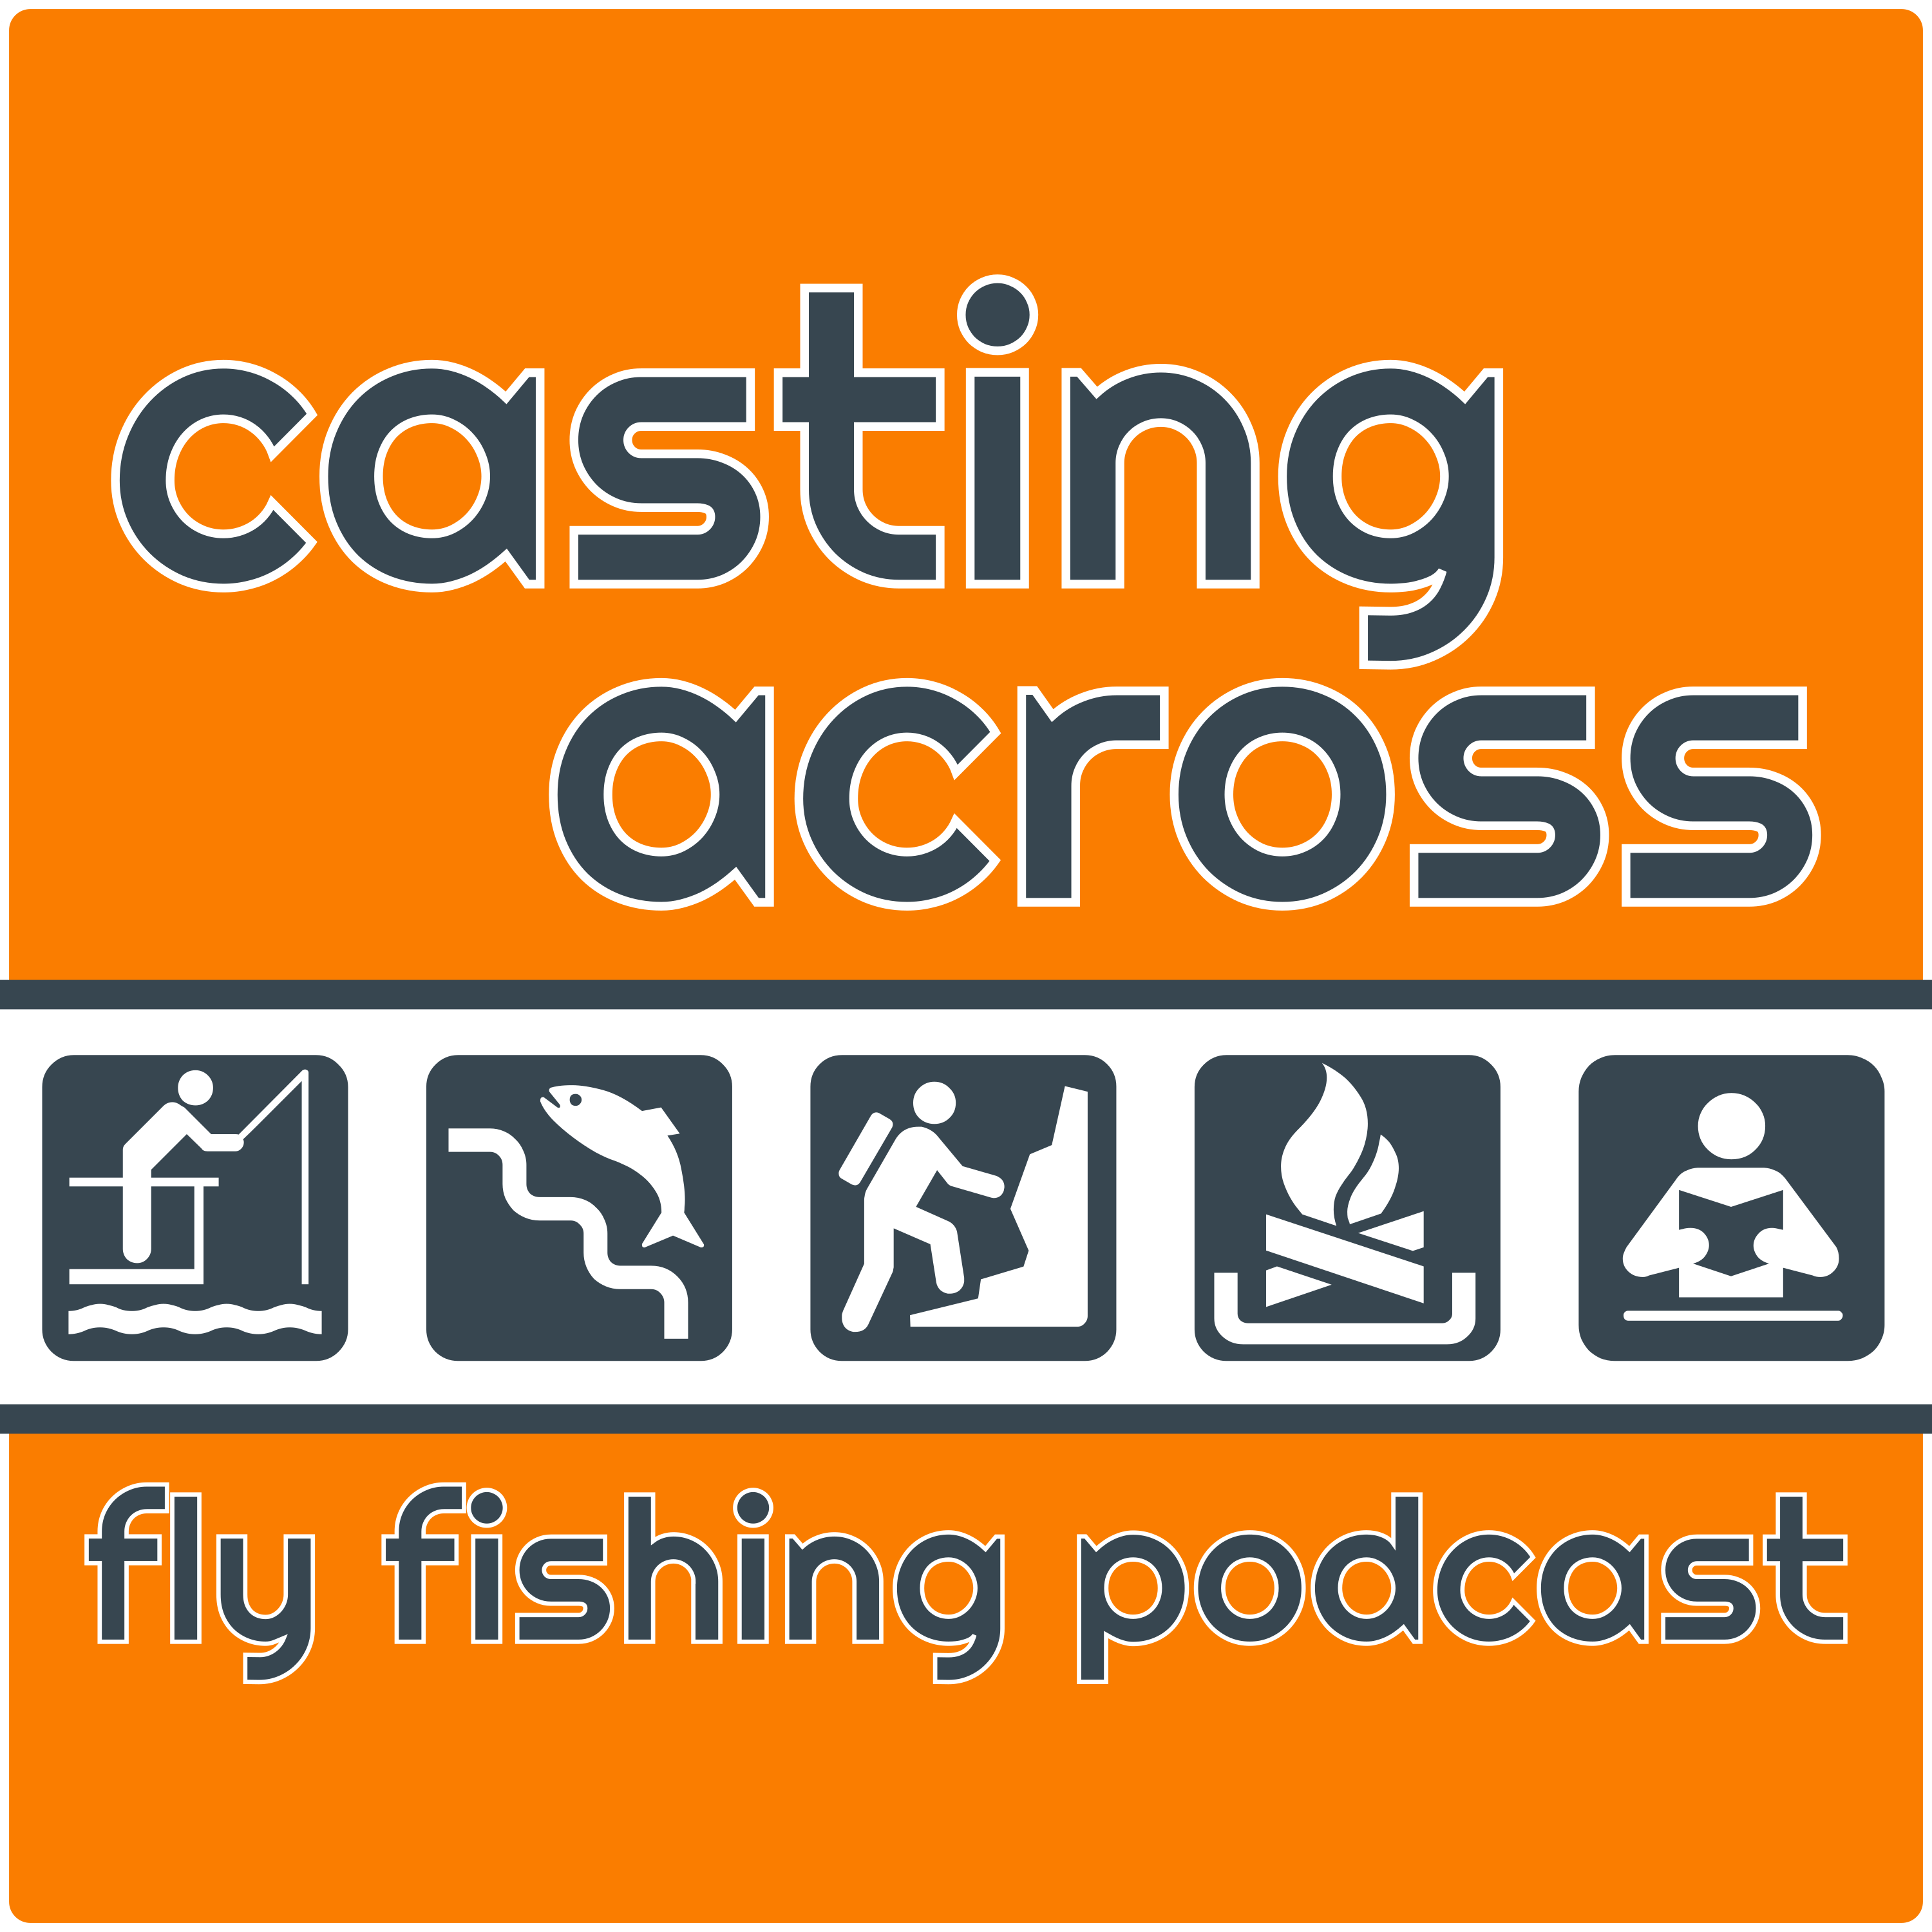 Rods! Casting! Action!